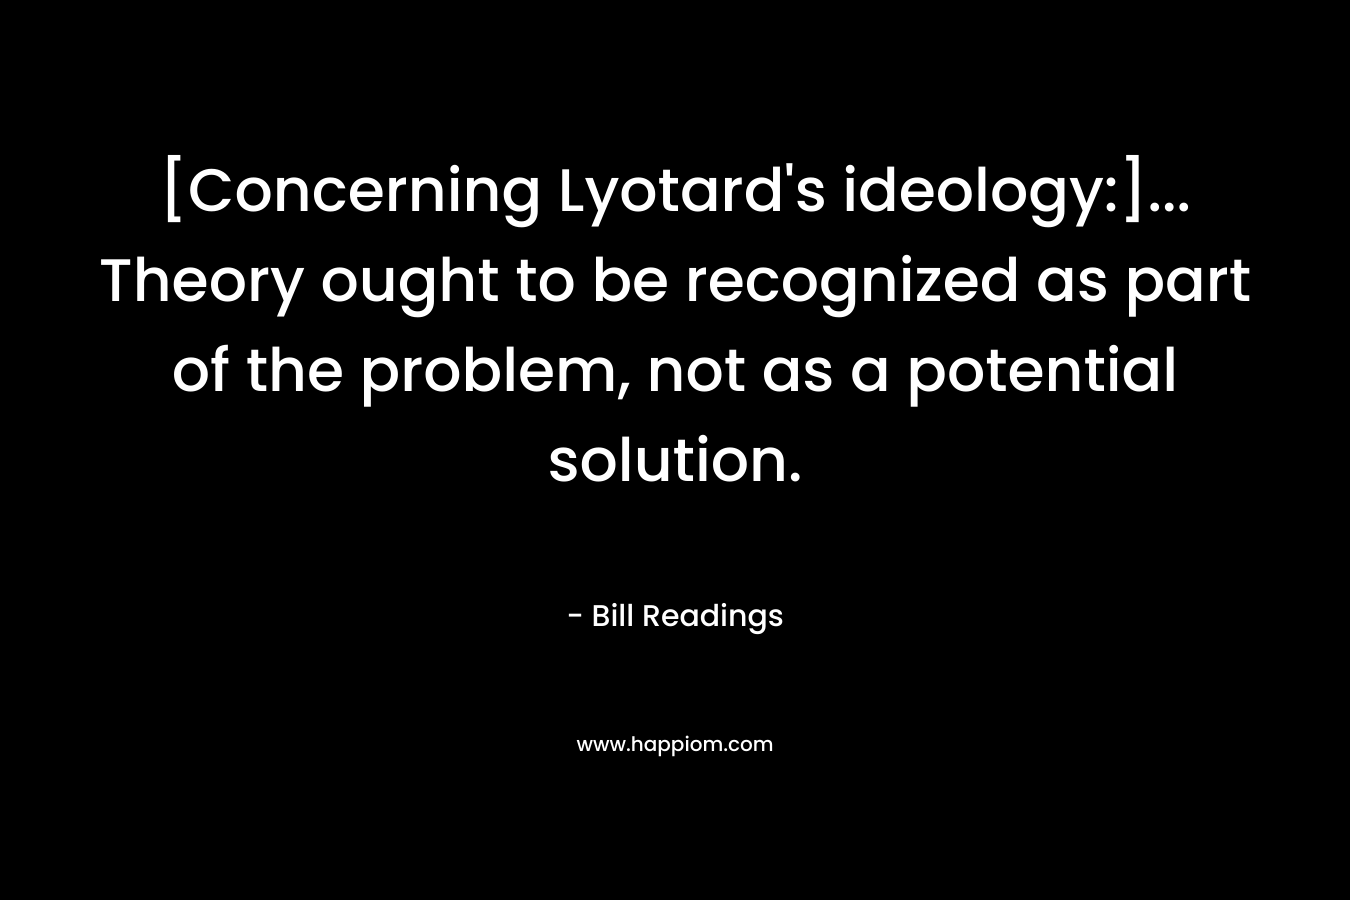 [Concerning Lyotard's ideology:]... Theory ought to be recognized as part of the problem, not as a potential solution.